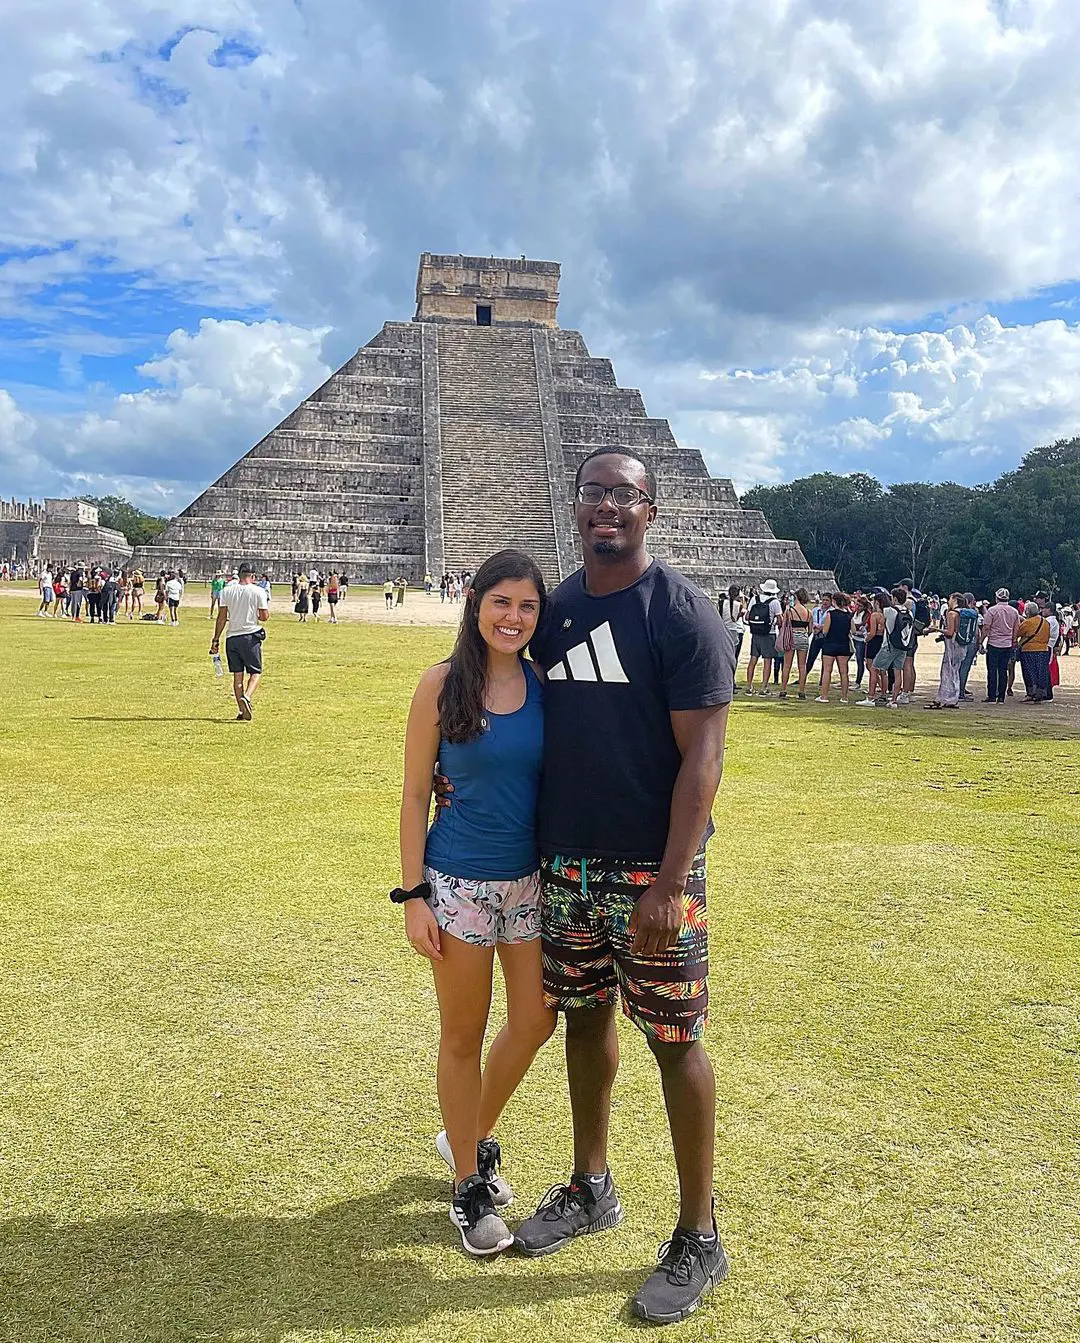 Rena and Joshua visit Chichen Itza in January 2023 during their Mexico trip